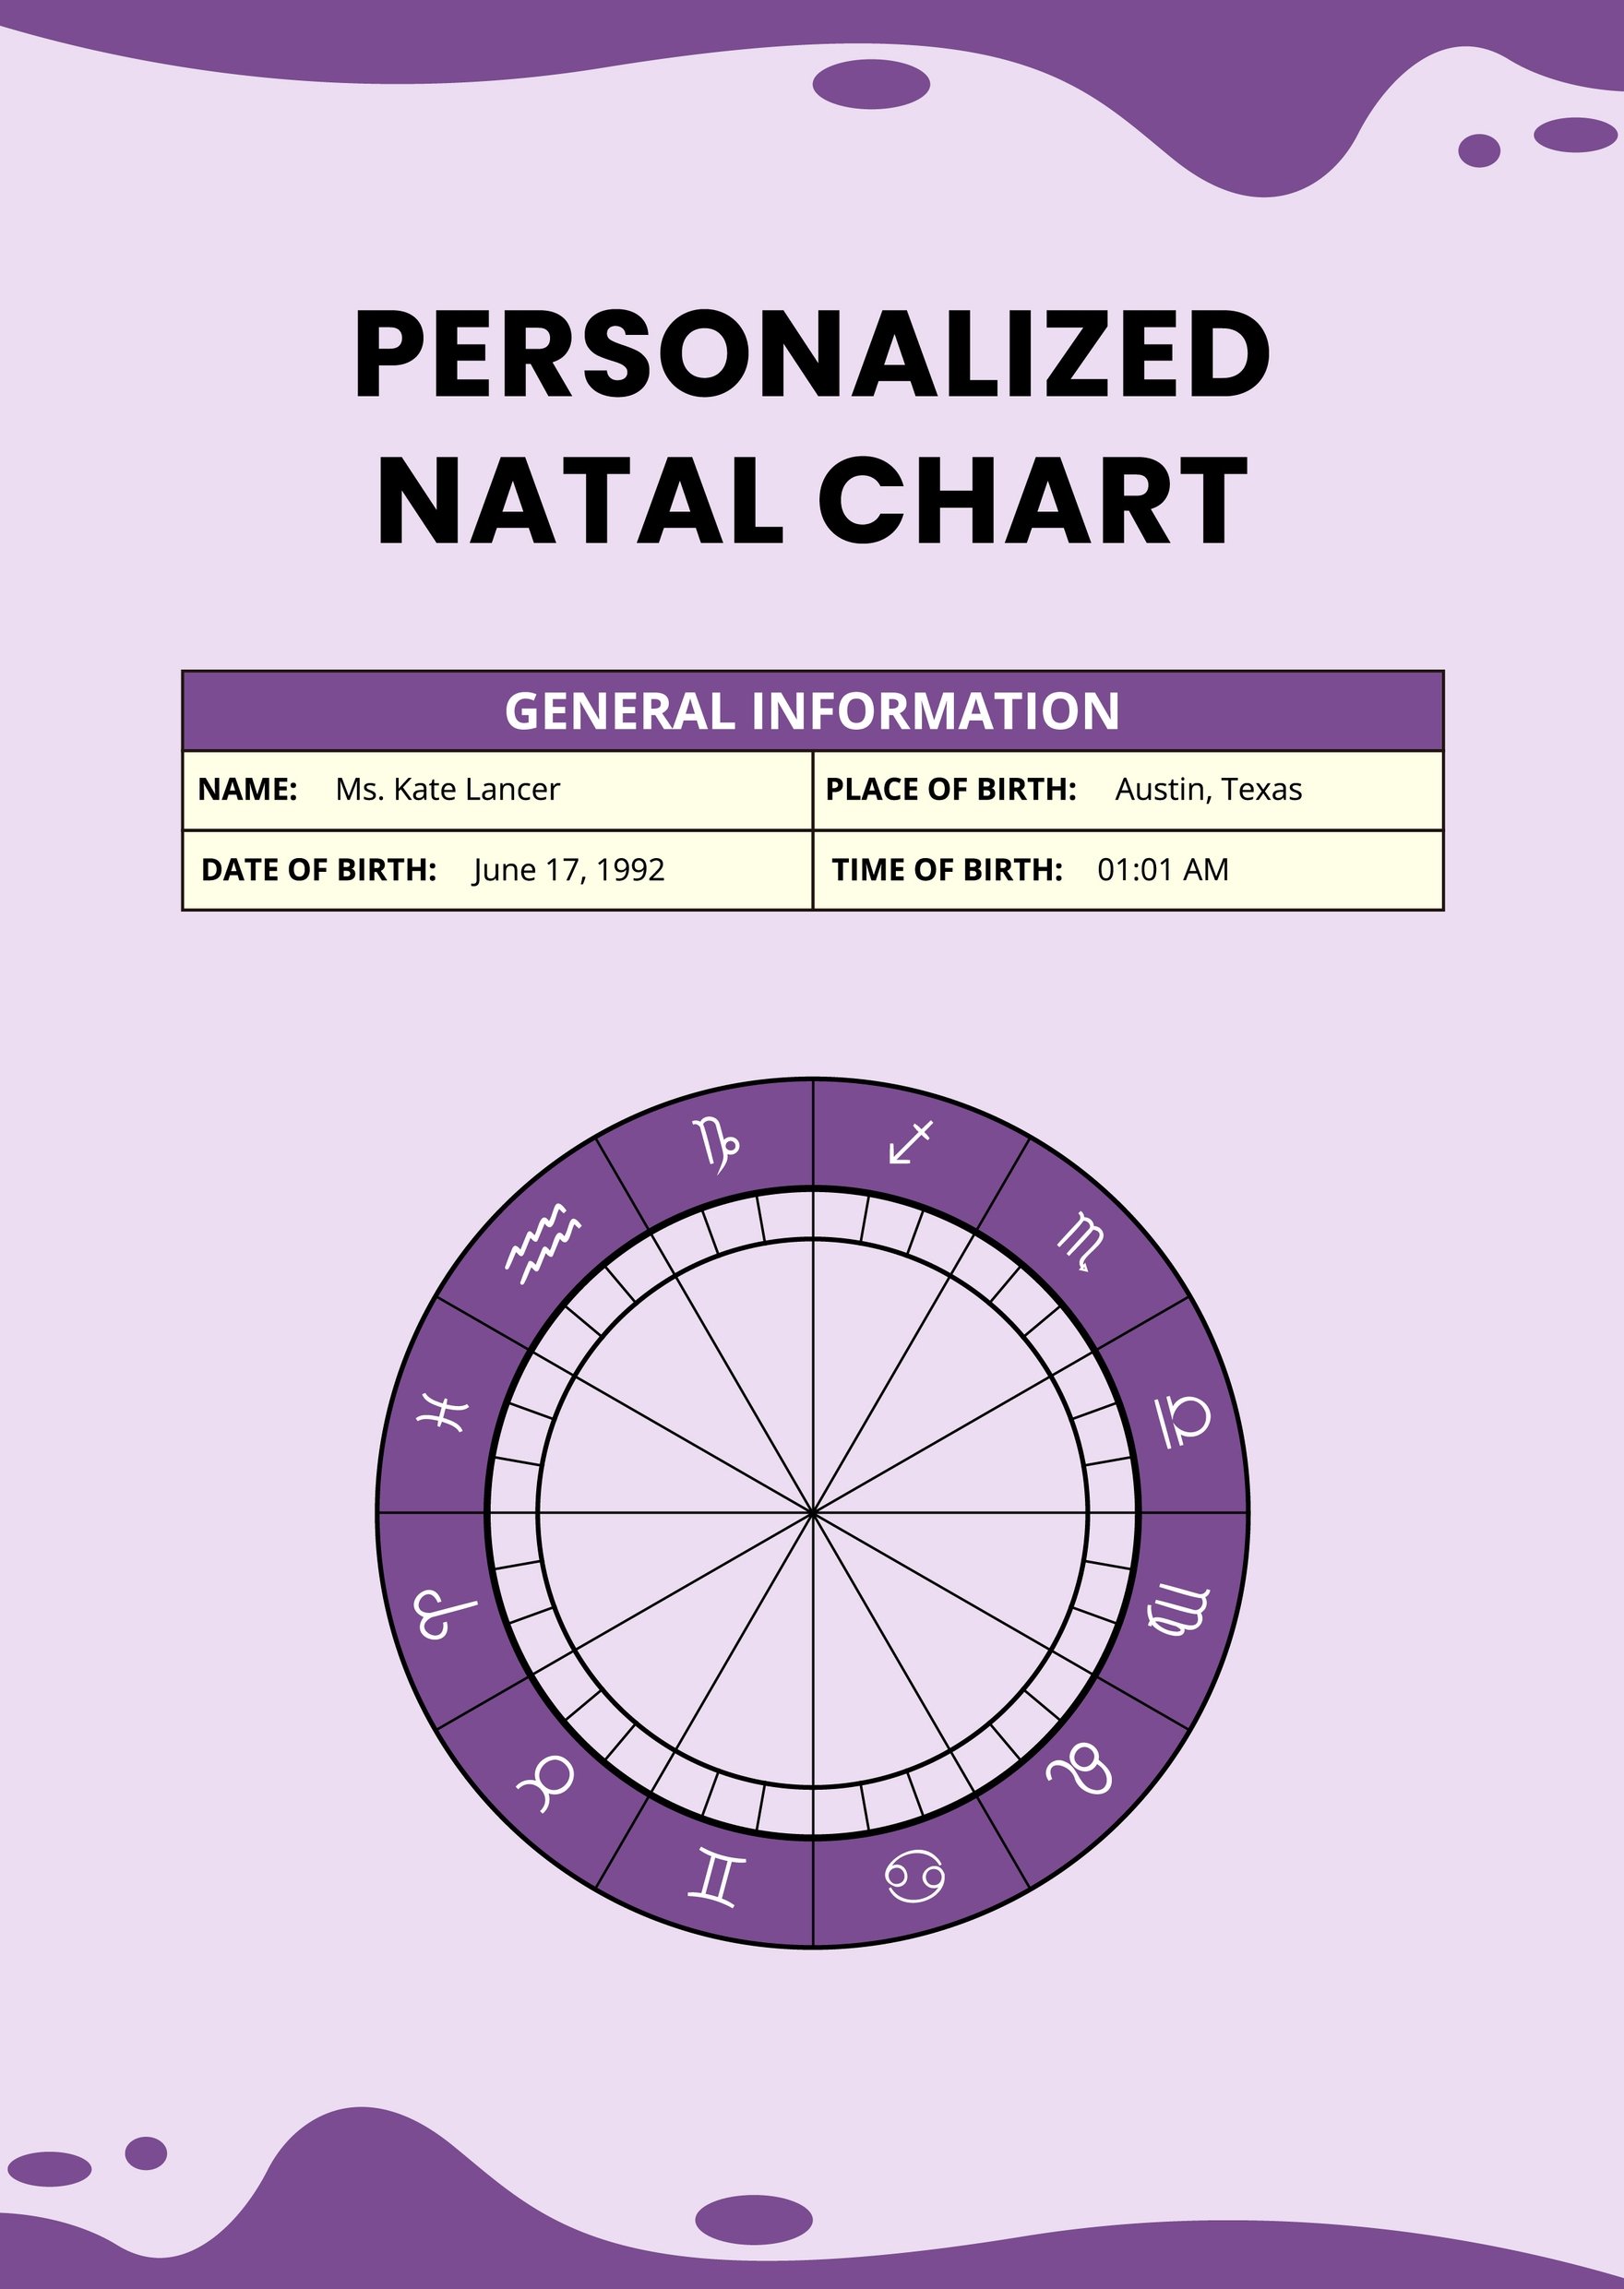 Personalized Natal Chart Template in Illustrator, PDF Download